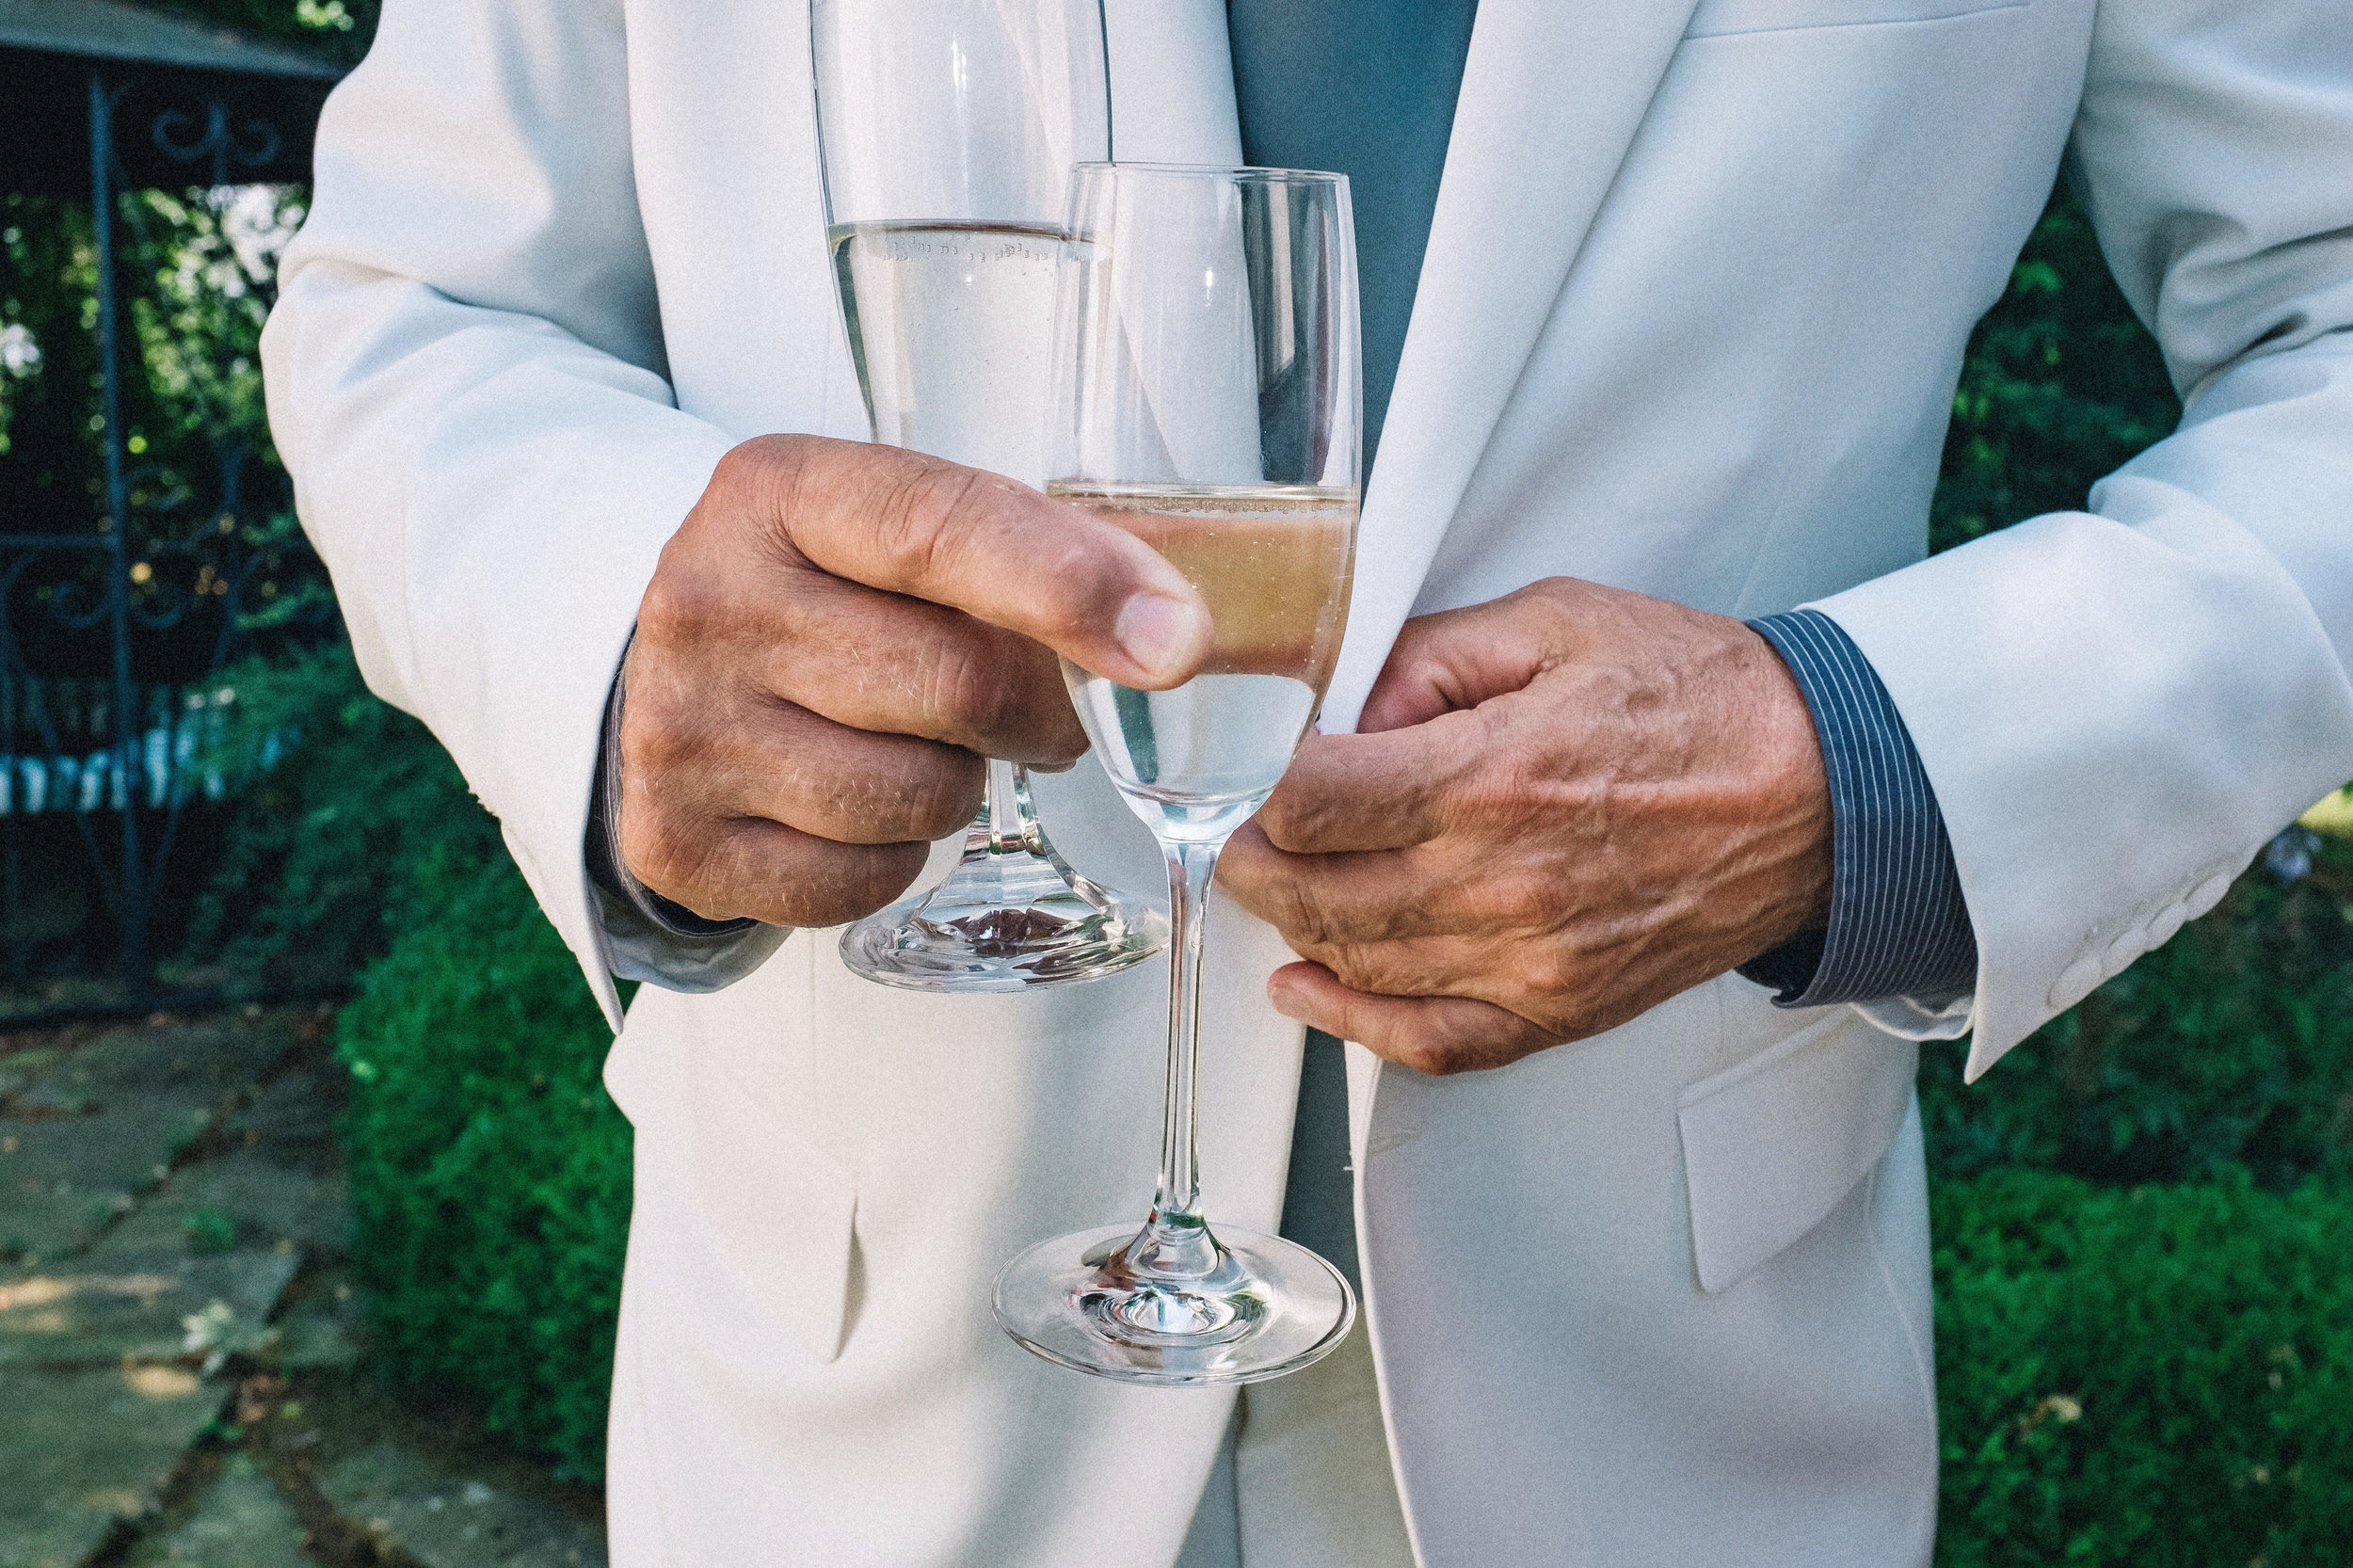 Groom's father unbuttoning his white jacket